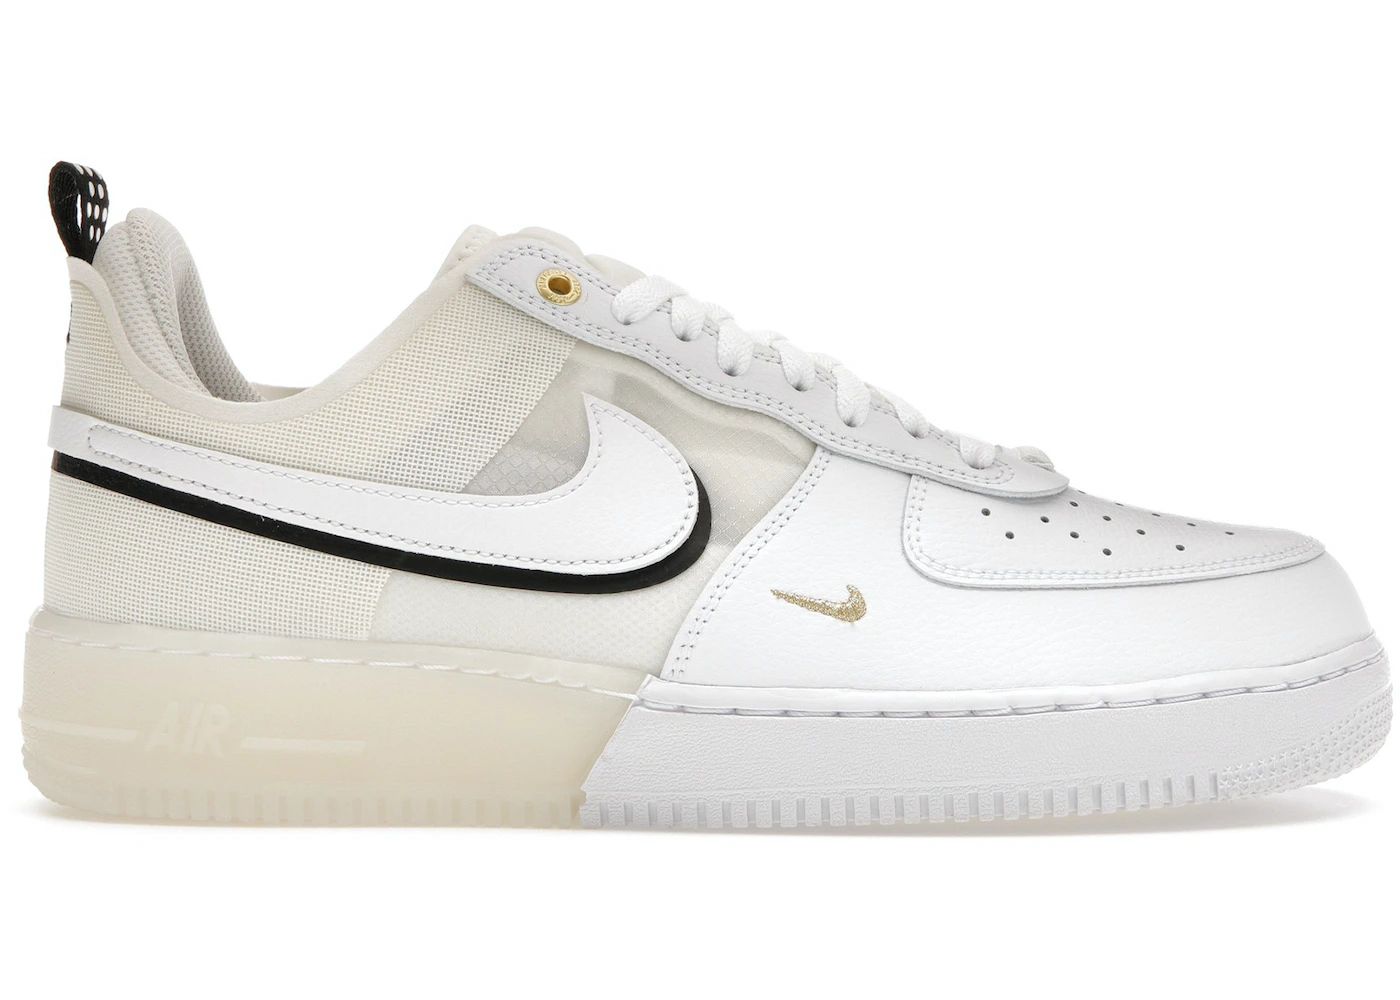 Nike mens Air Force 1 Mid React Shoes, White/Black